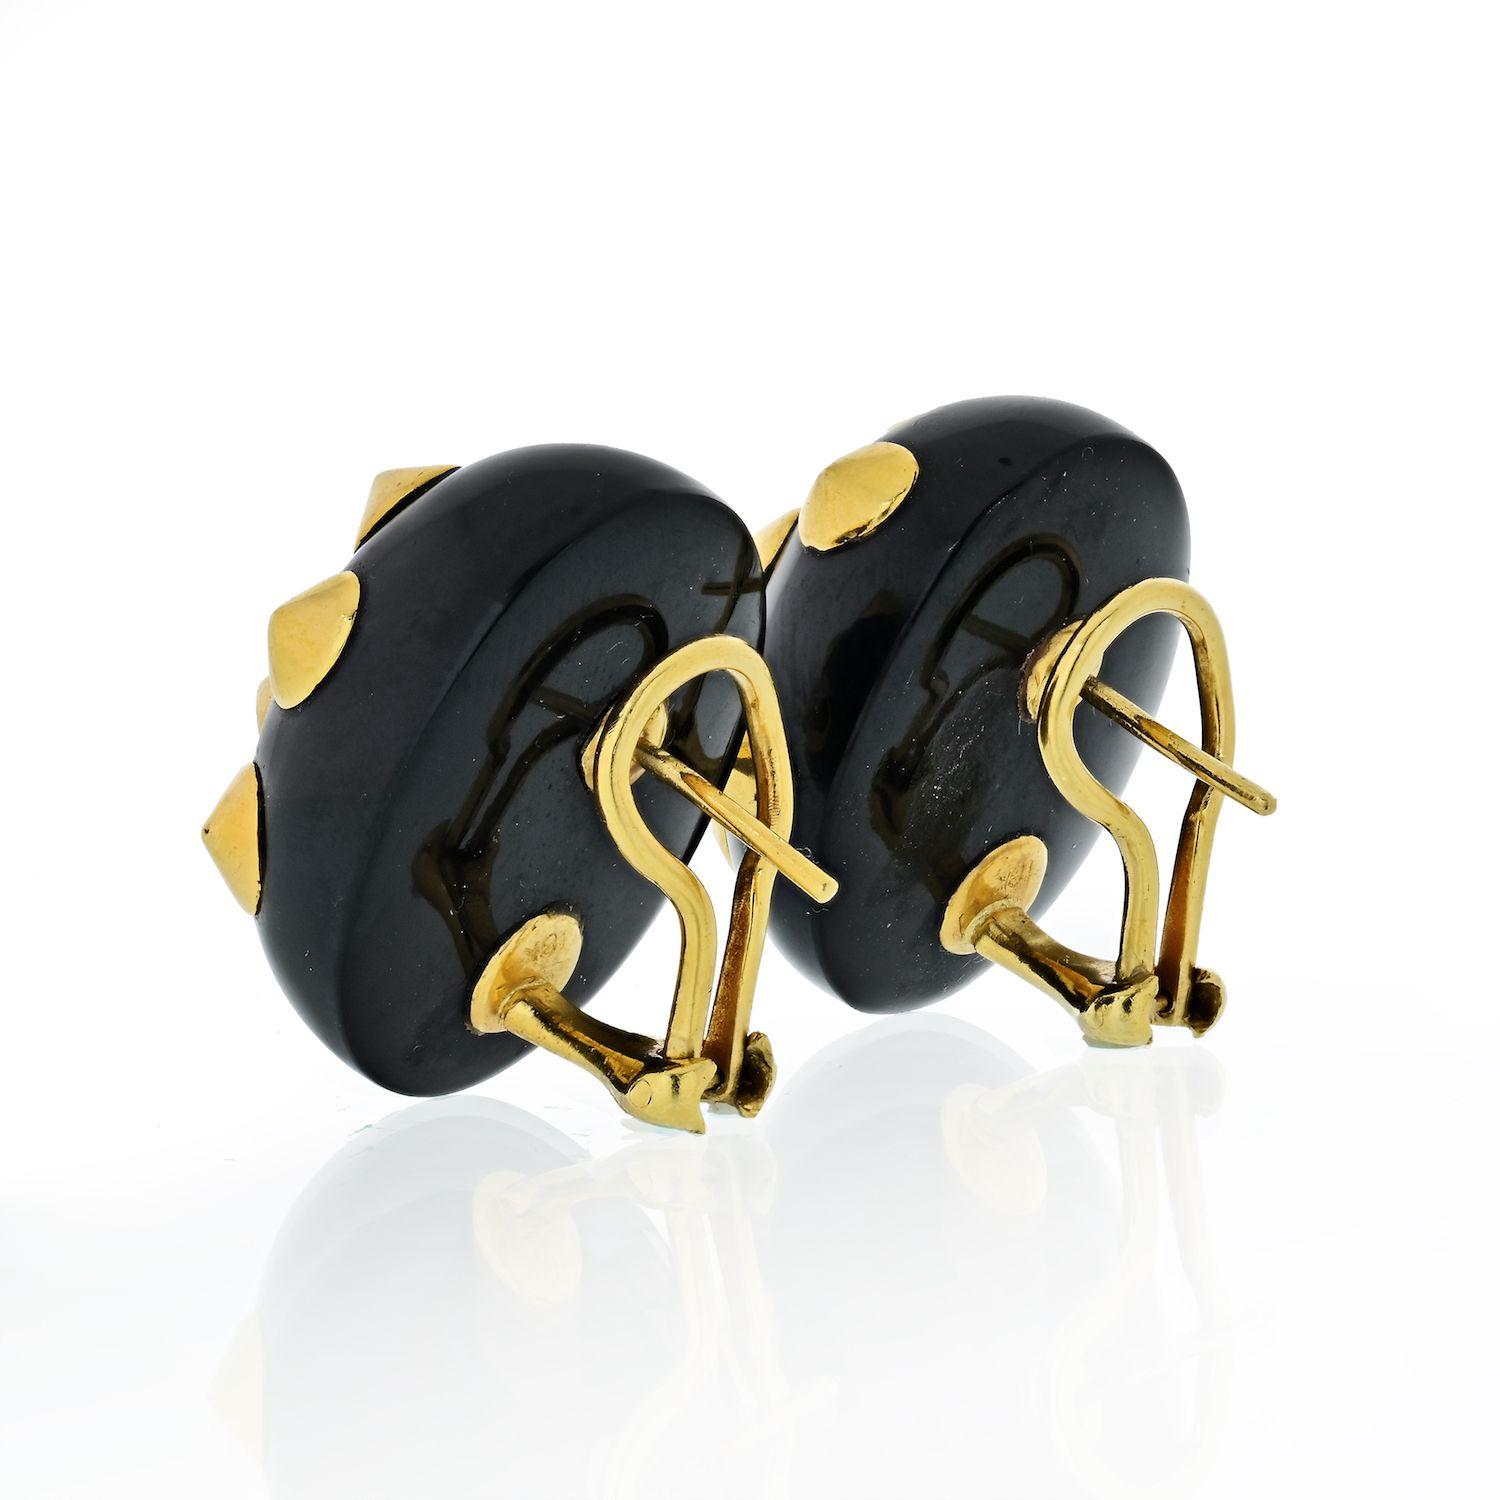 An iconic pair of 18k yellow gold earrings adorned with black jade. Crafted by famed designer Angela Cummings, the earrings measure 25mm x 21mm and weigh 26 grams.
Post backing for pierced ears. 
Each designed as a carved black jade half hoop set